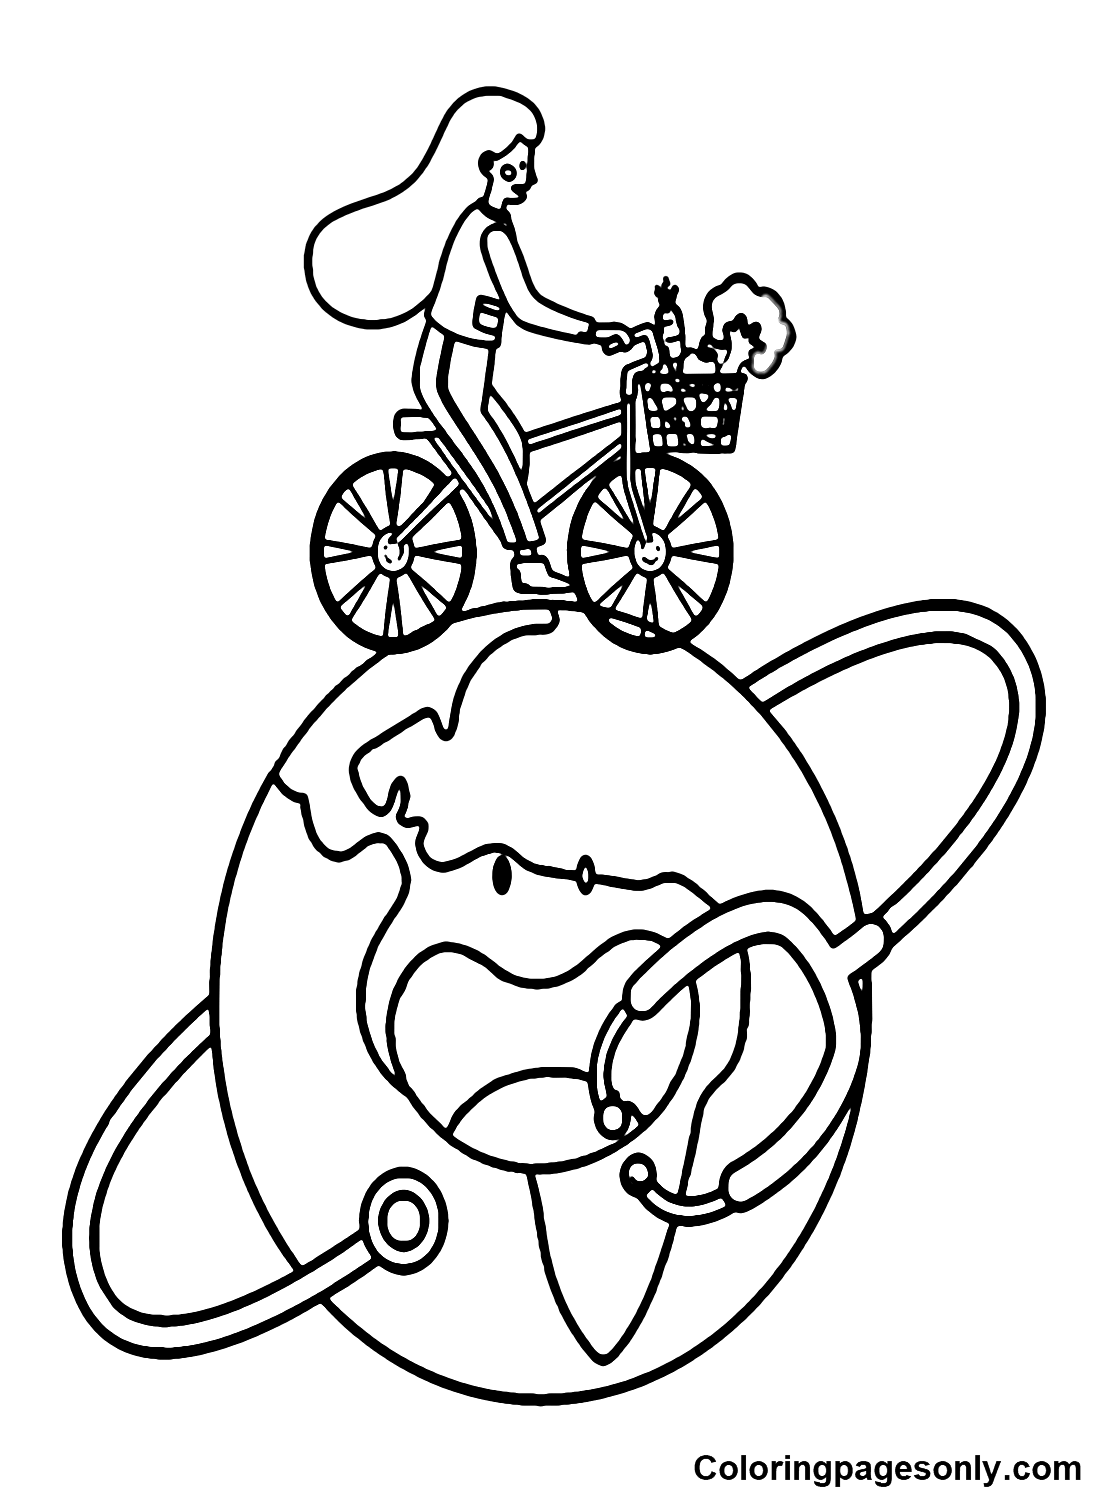 World Health Day for Children Coloring Page